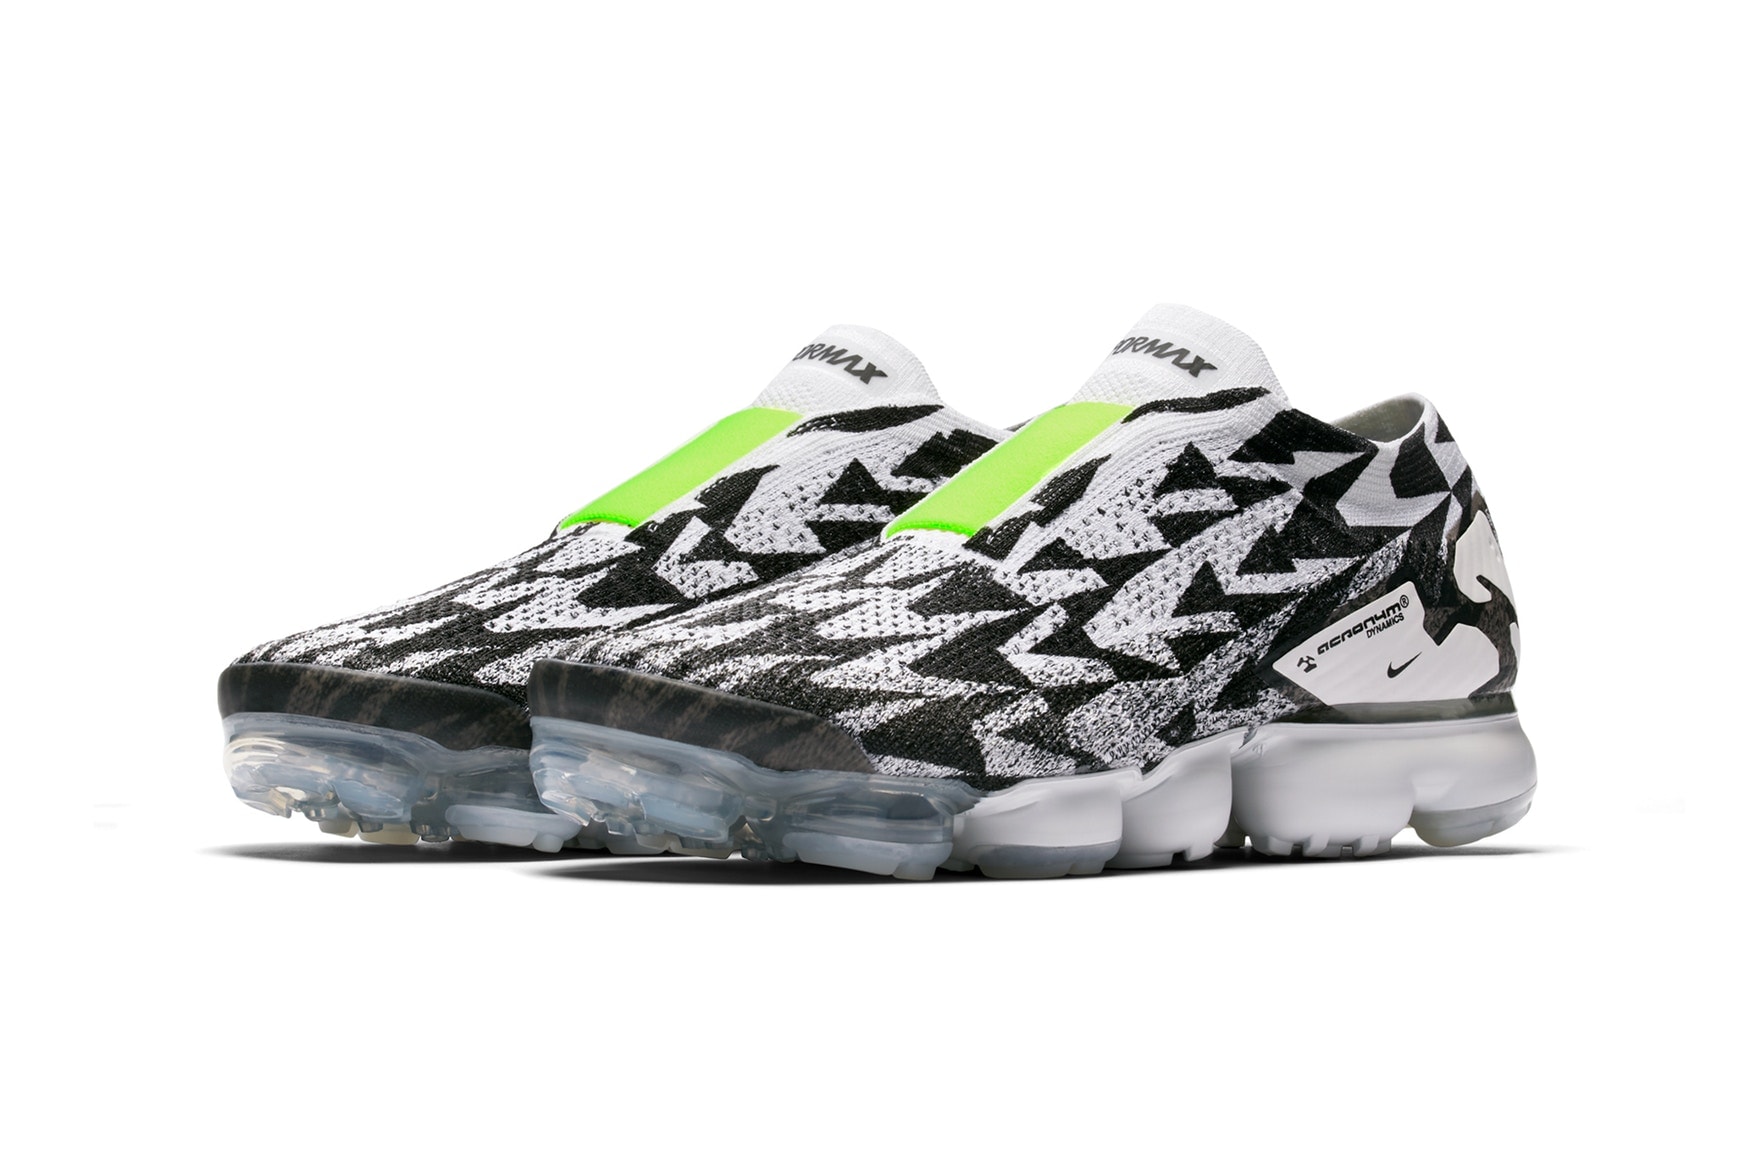 ACRONYM x Nike Air VaporMax Moc 2 Air Max Day footwear release dates 2018 march Errolson Hugh Johnny's Icy Passage The Illusional Ja Thirsty Bandit where to buy